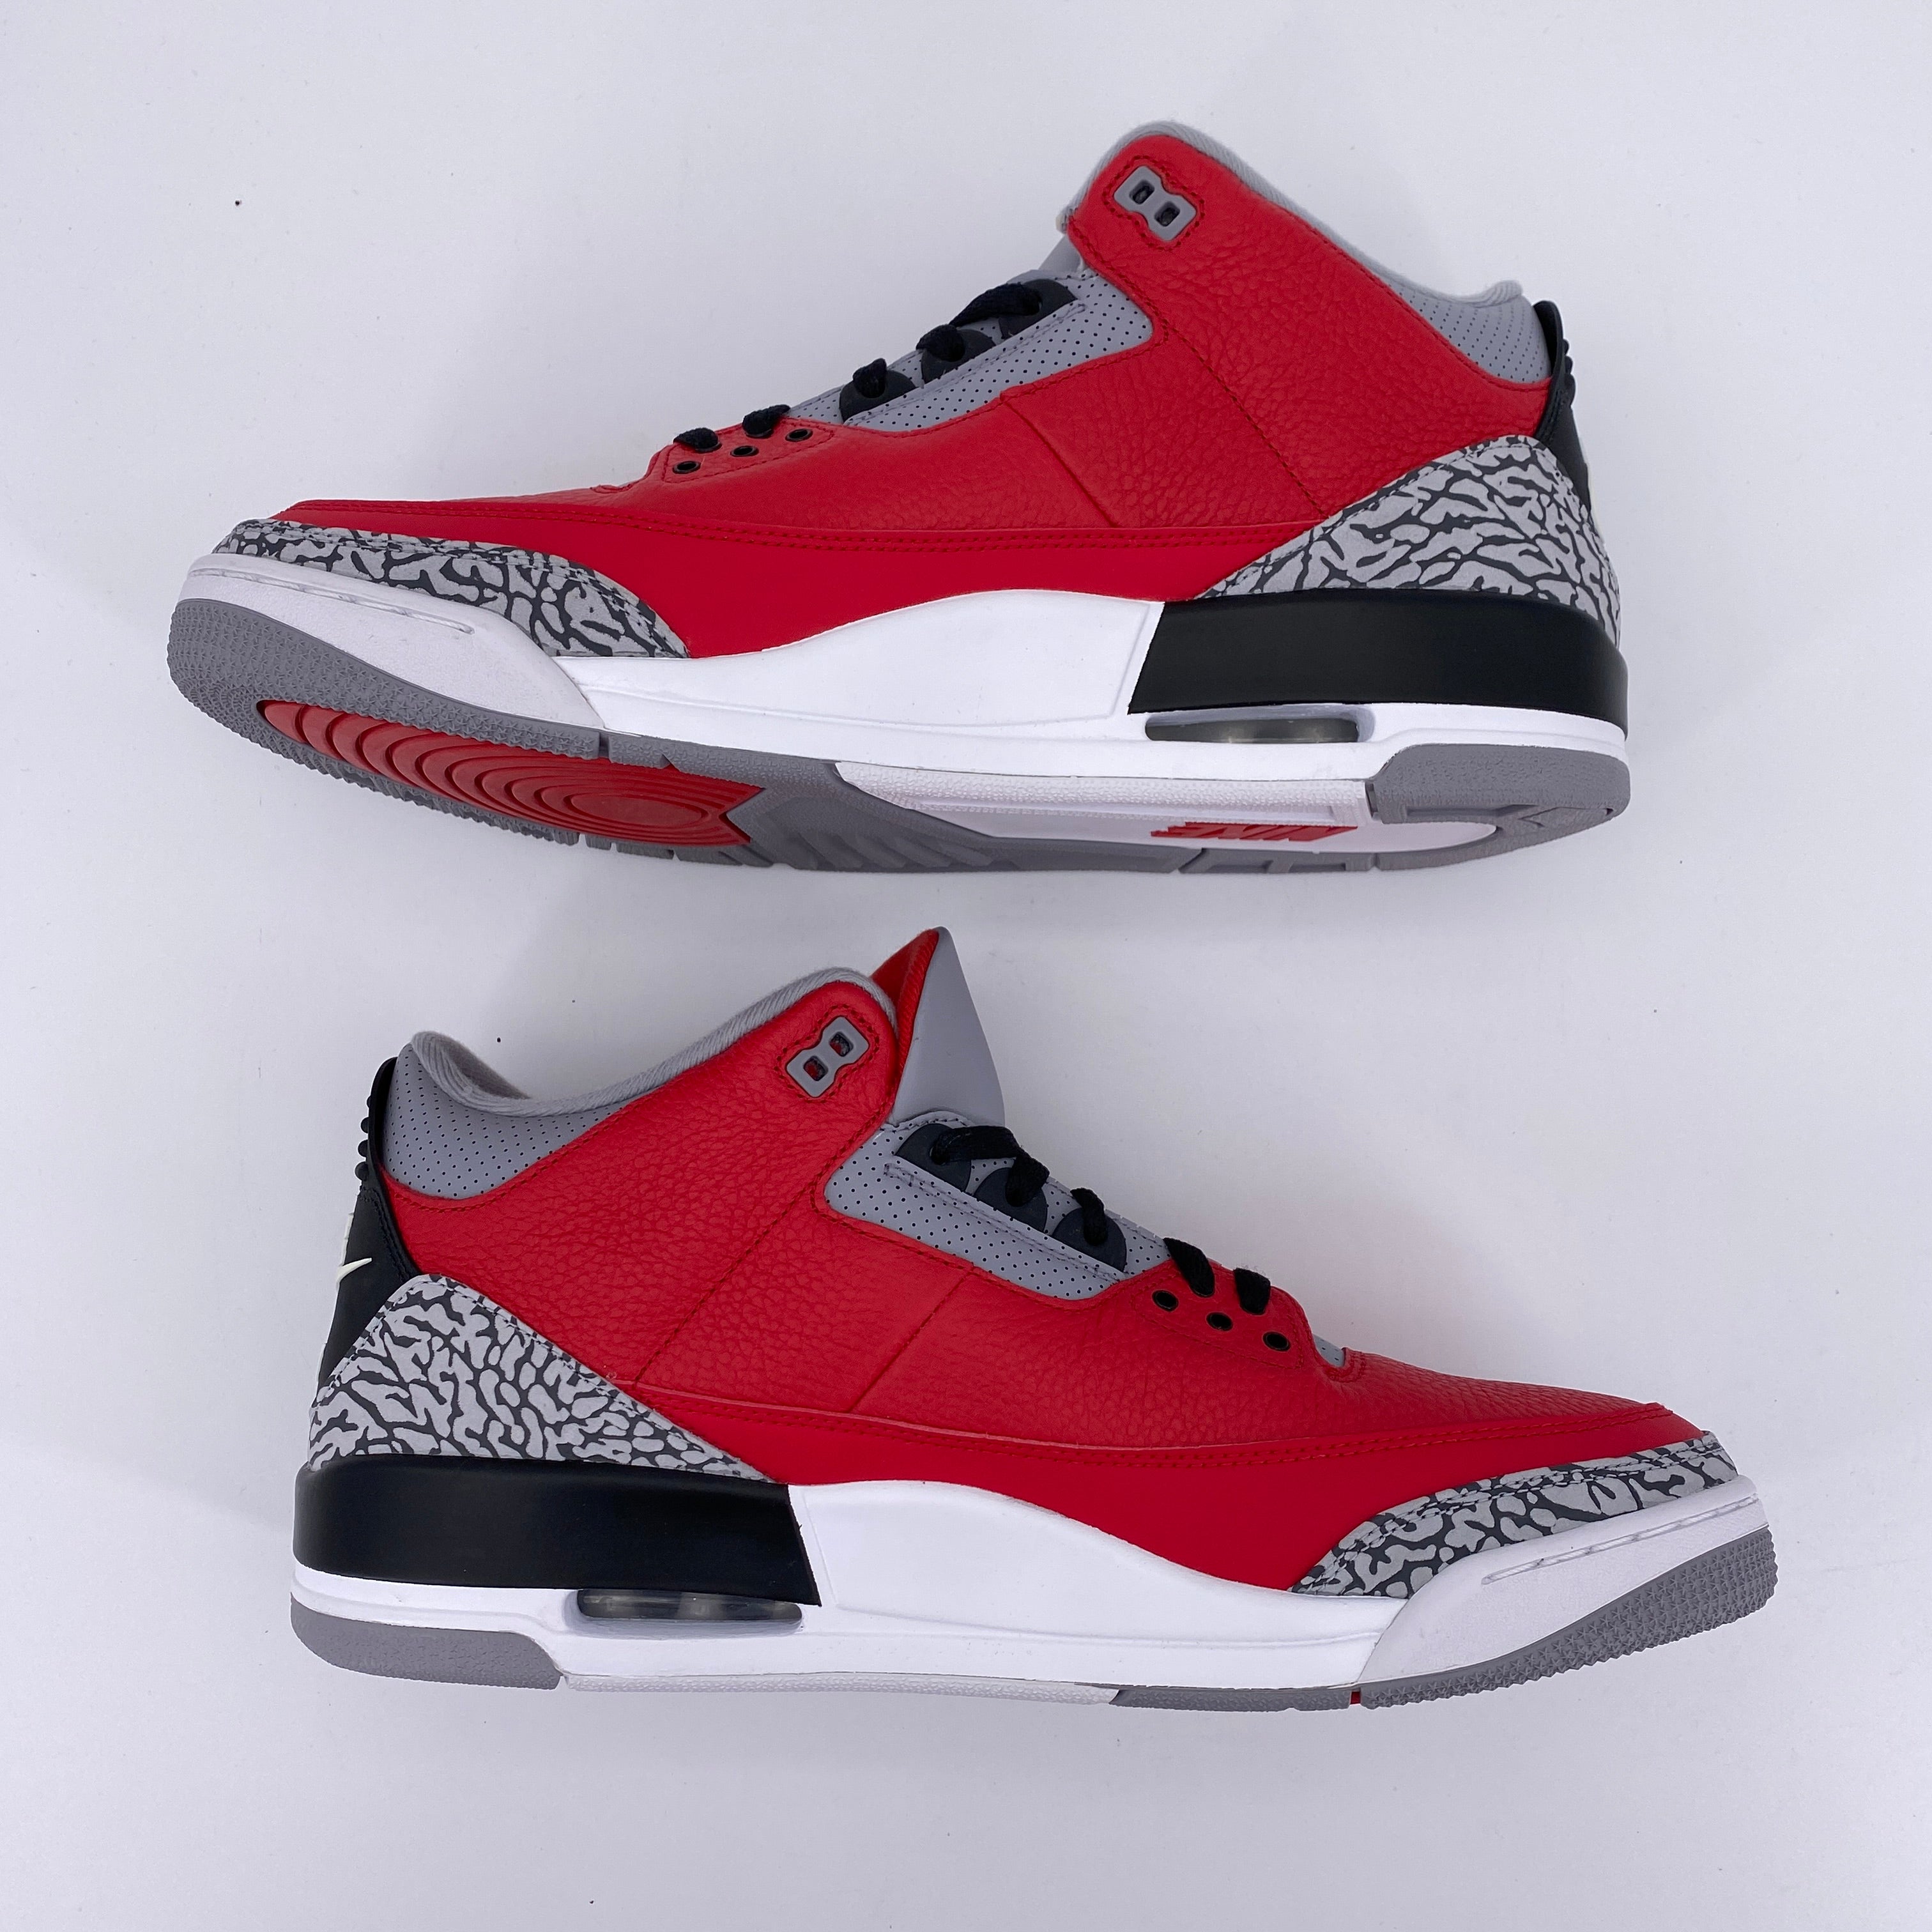 Air Jordan 3 Retro &quot;Fire Red Cement Chi&quot; 2020 New (Cond) Size 14